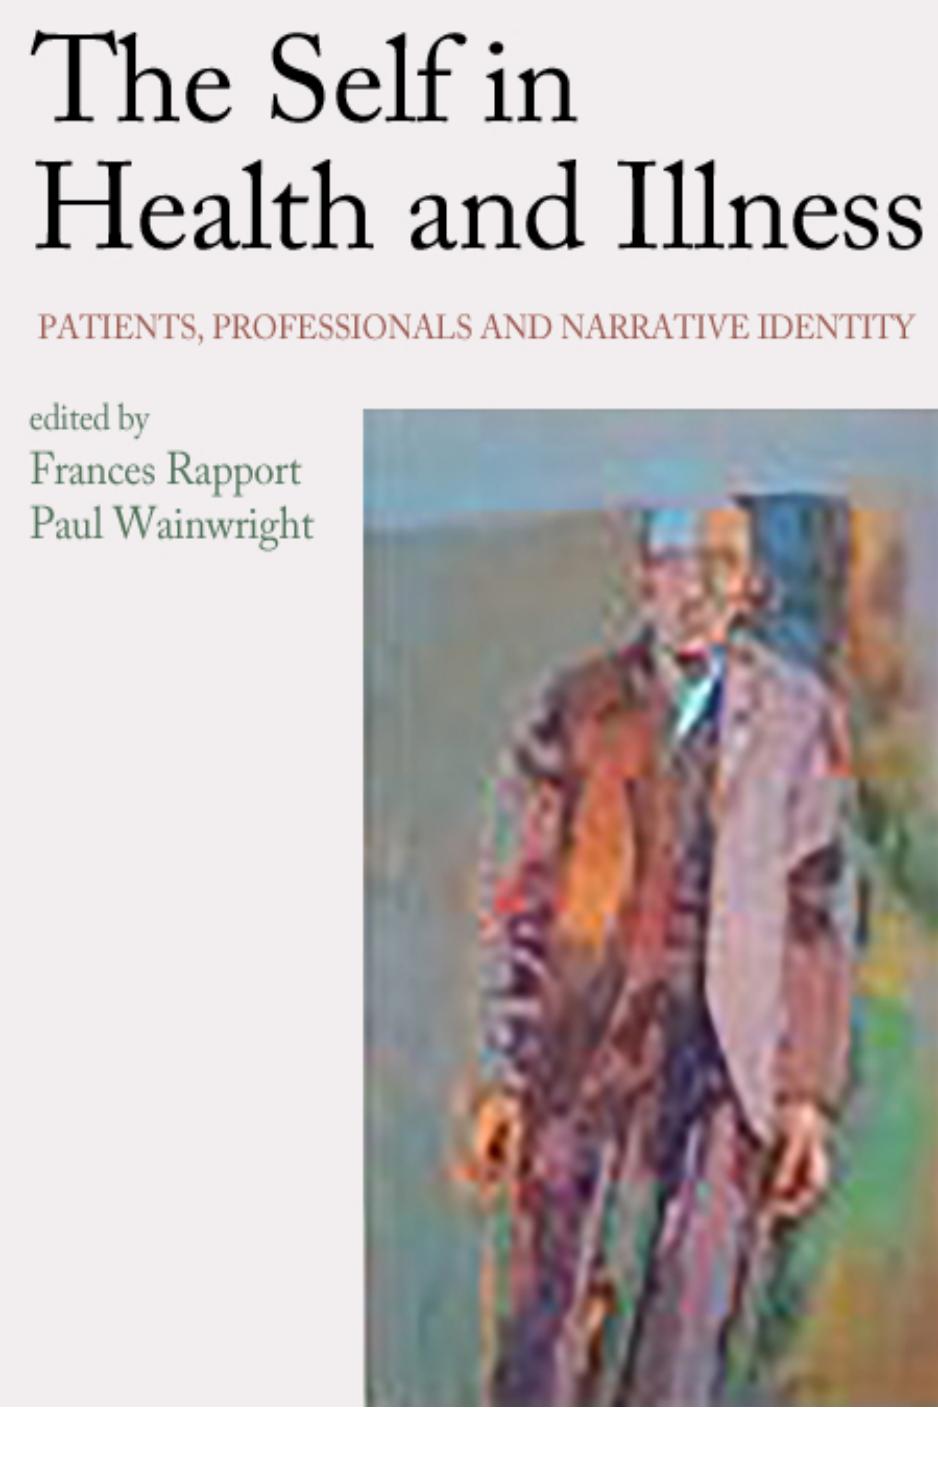 The Self in Health and Illness  Patients, Professionals and Narrative Identity (2017)